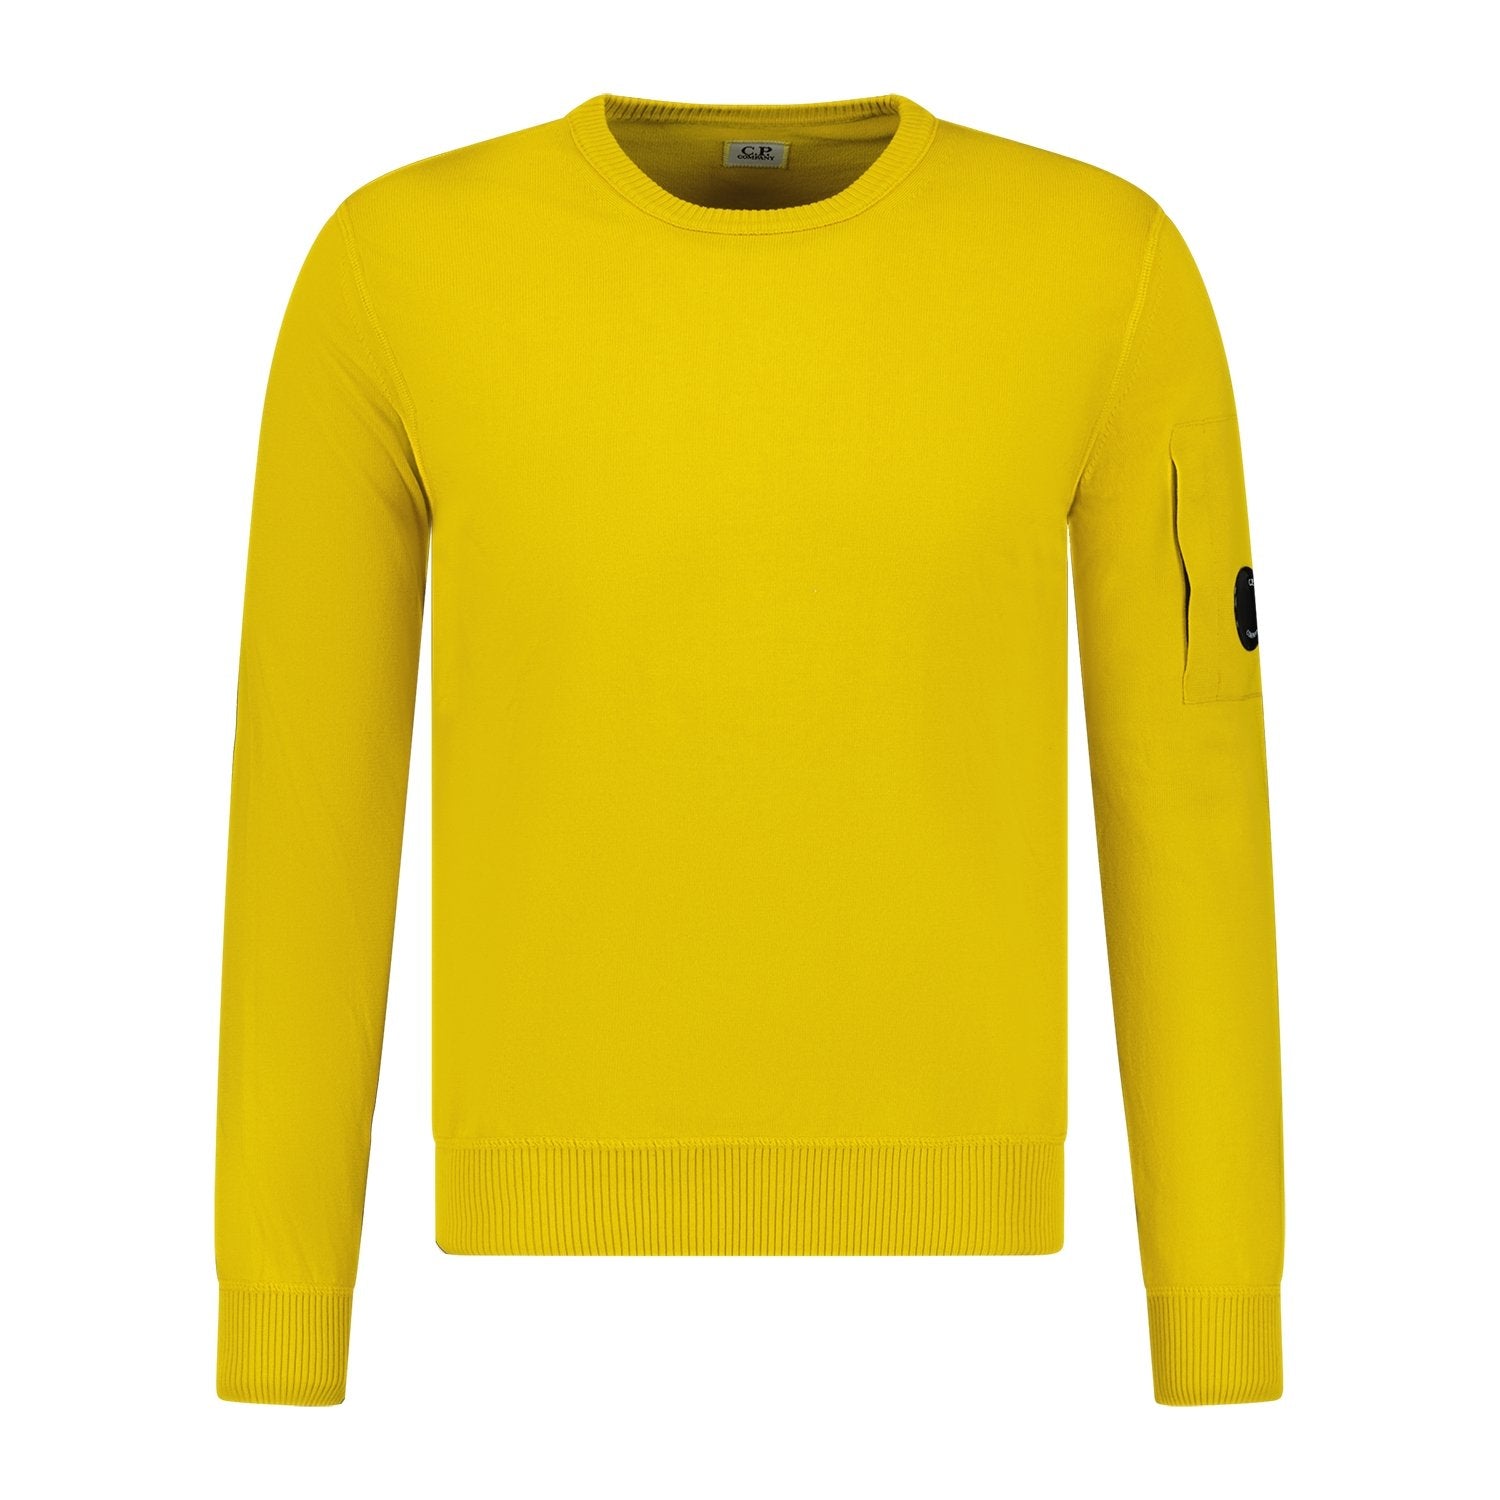 CP Company Arm Lens Knitted Sweatshirt Yellow